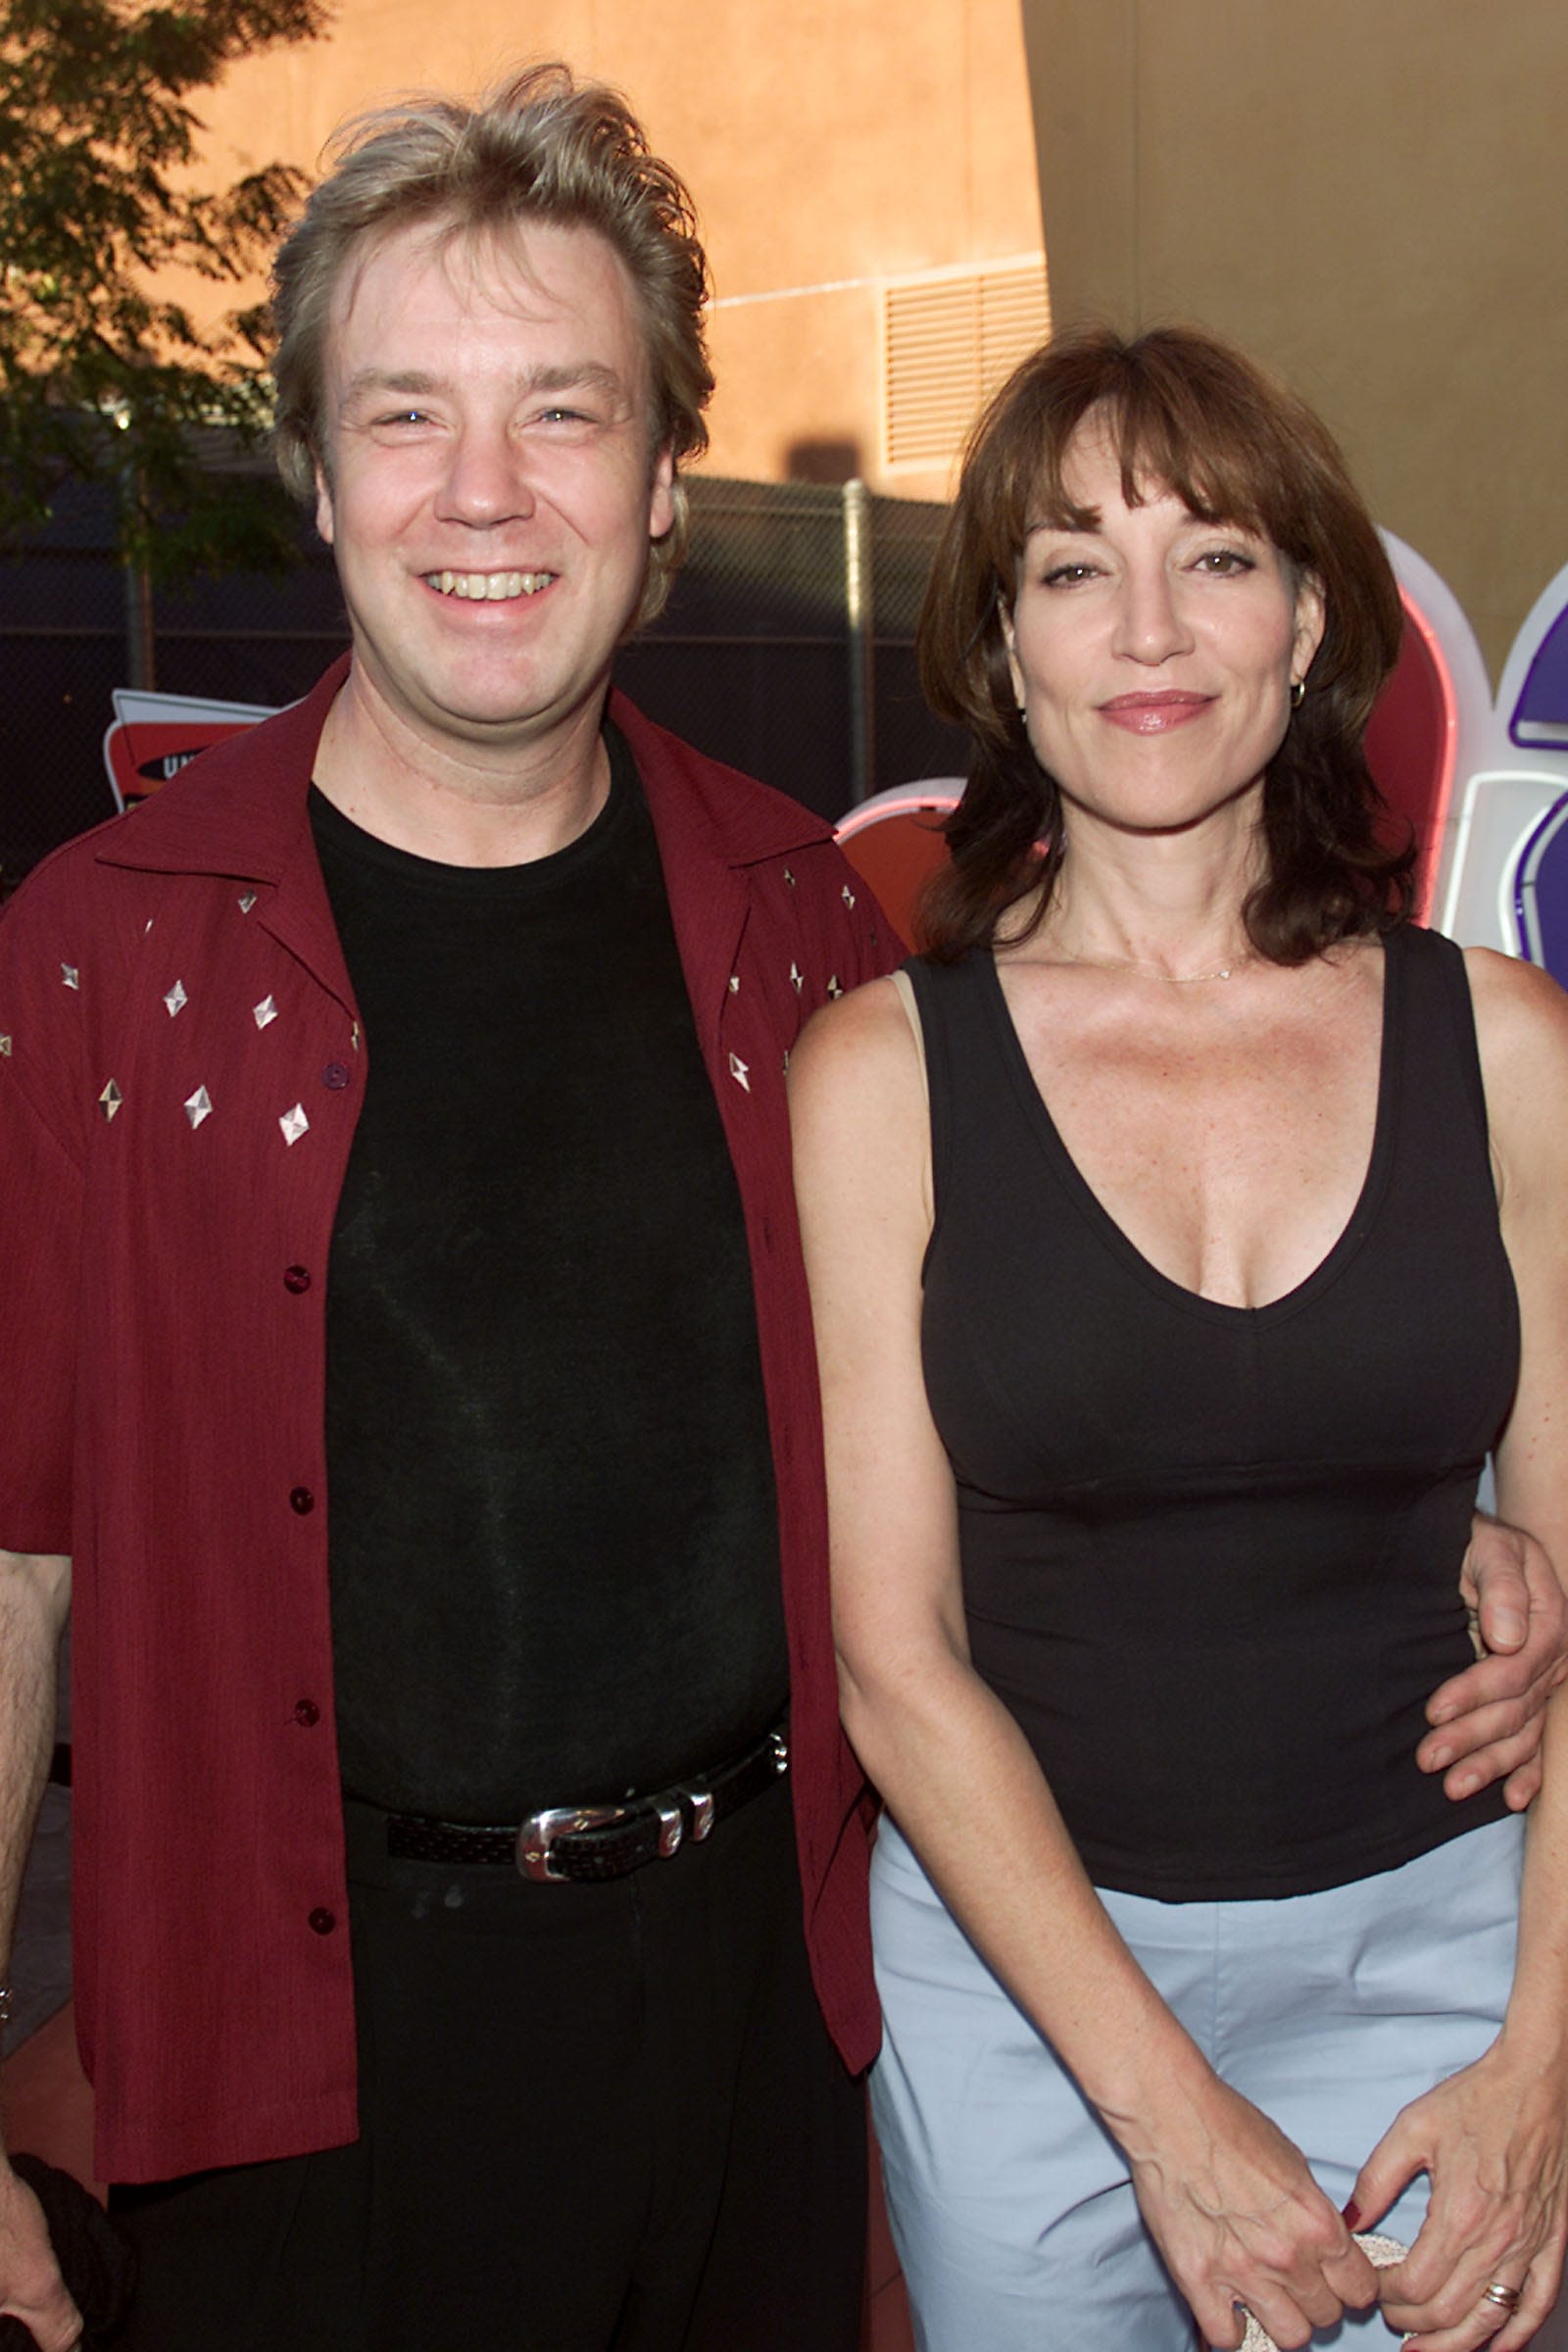 Katey Sagal's ex-husband and drummer Jack White has died, son Jackson White says